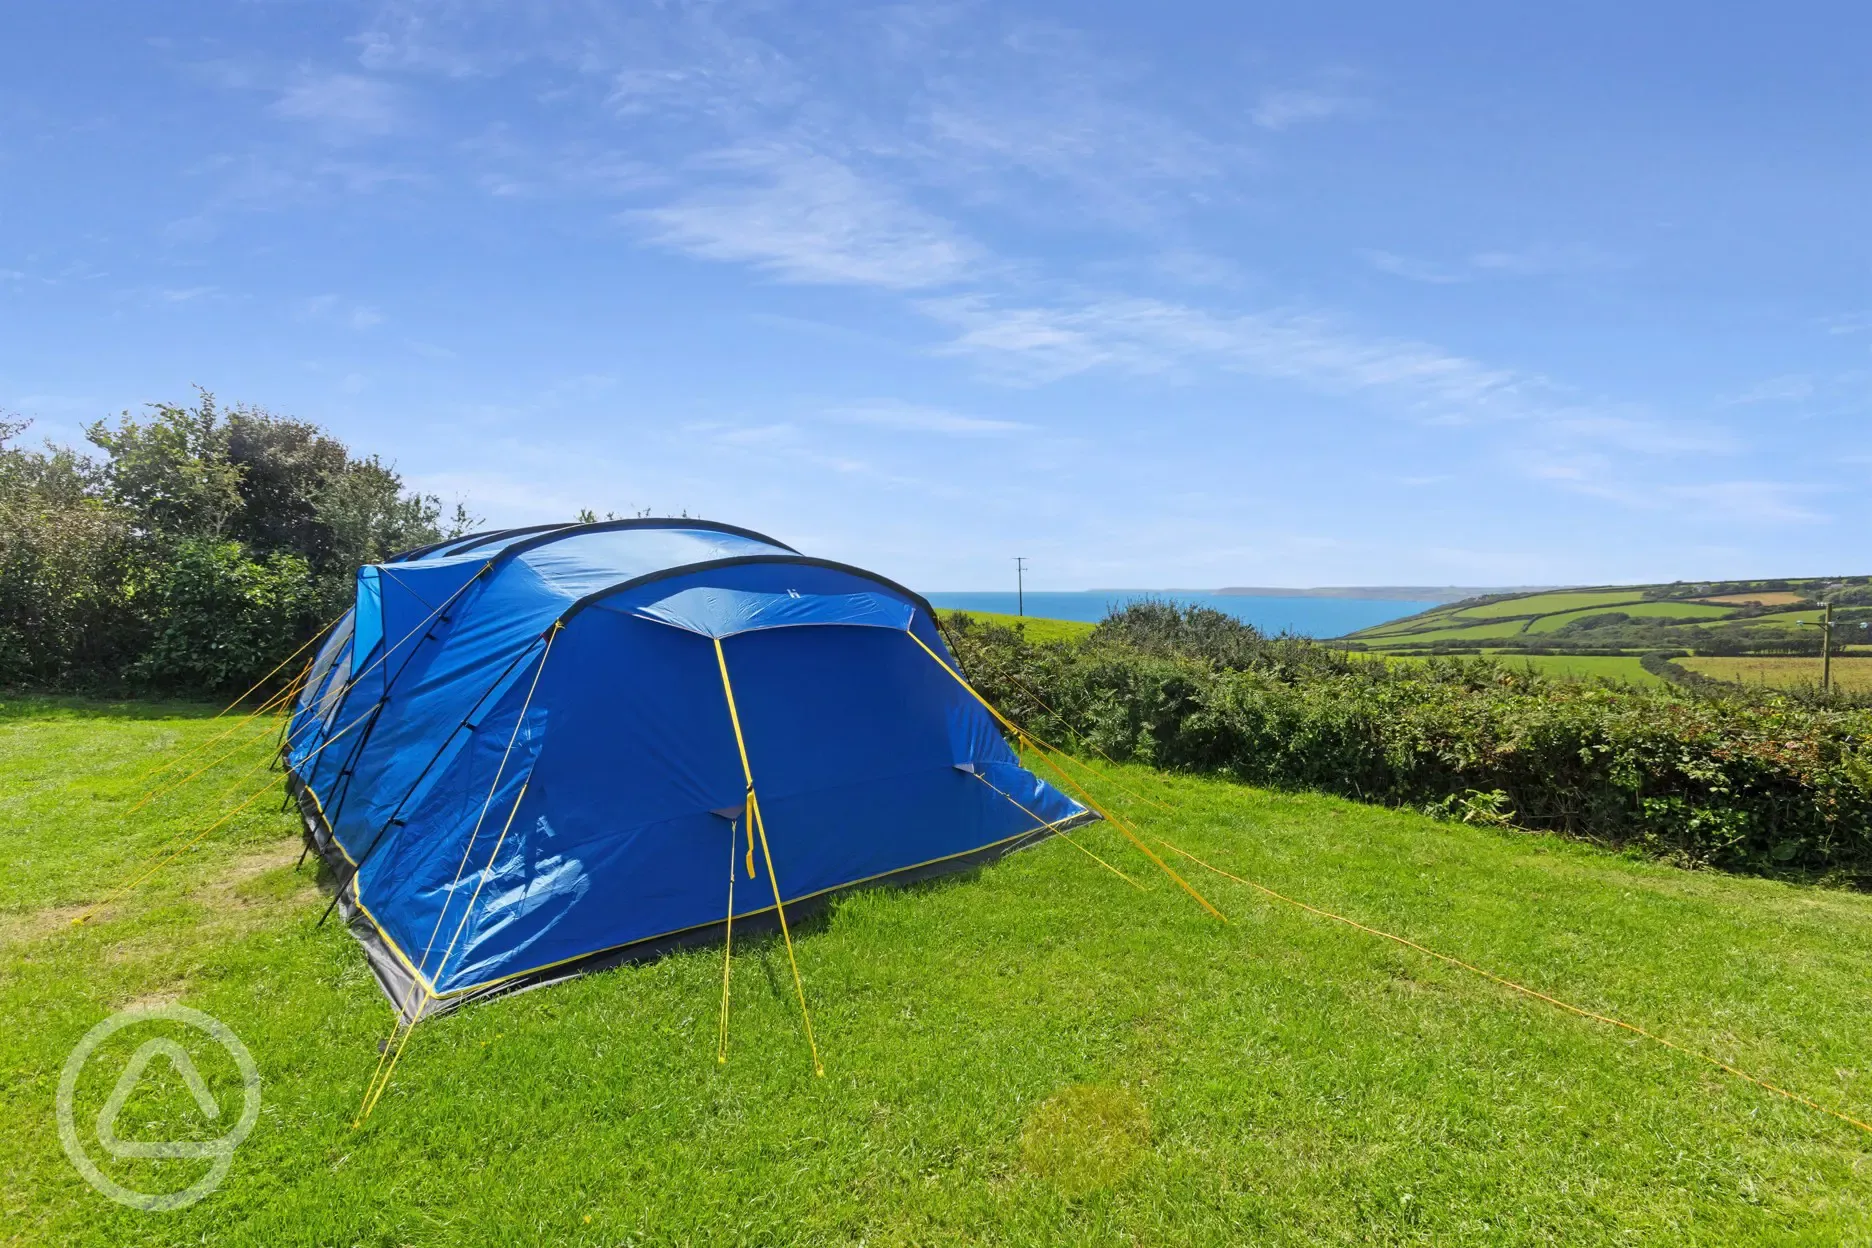 Standard sea view grass pitches